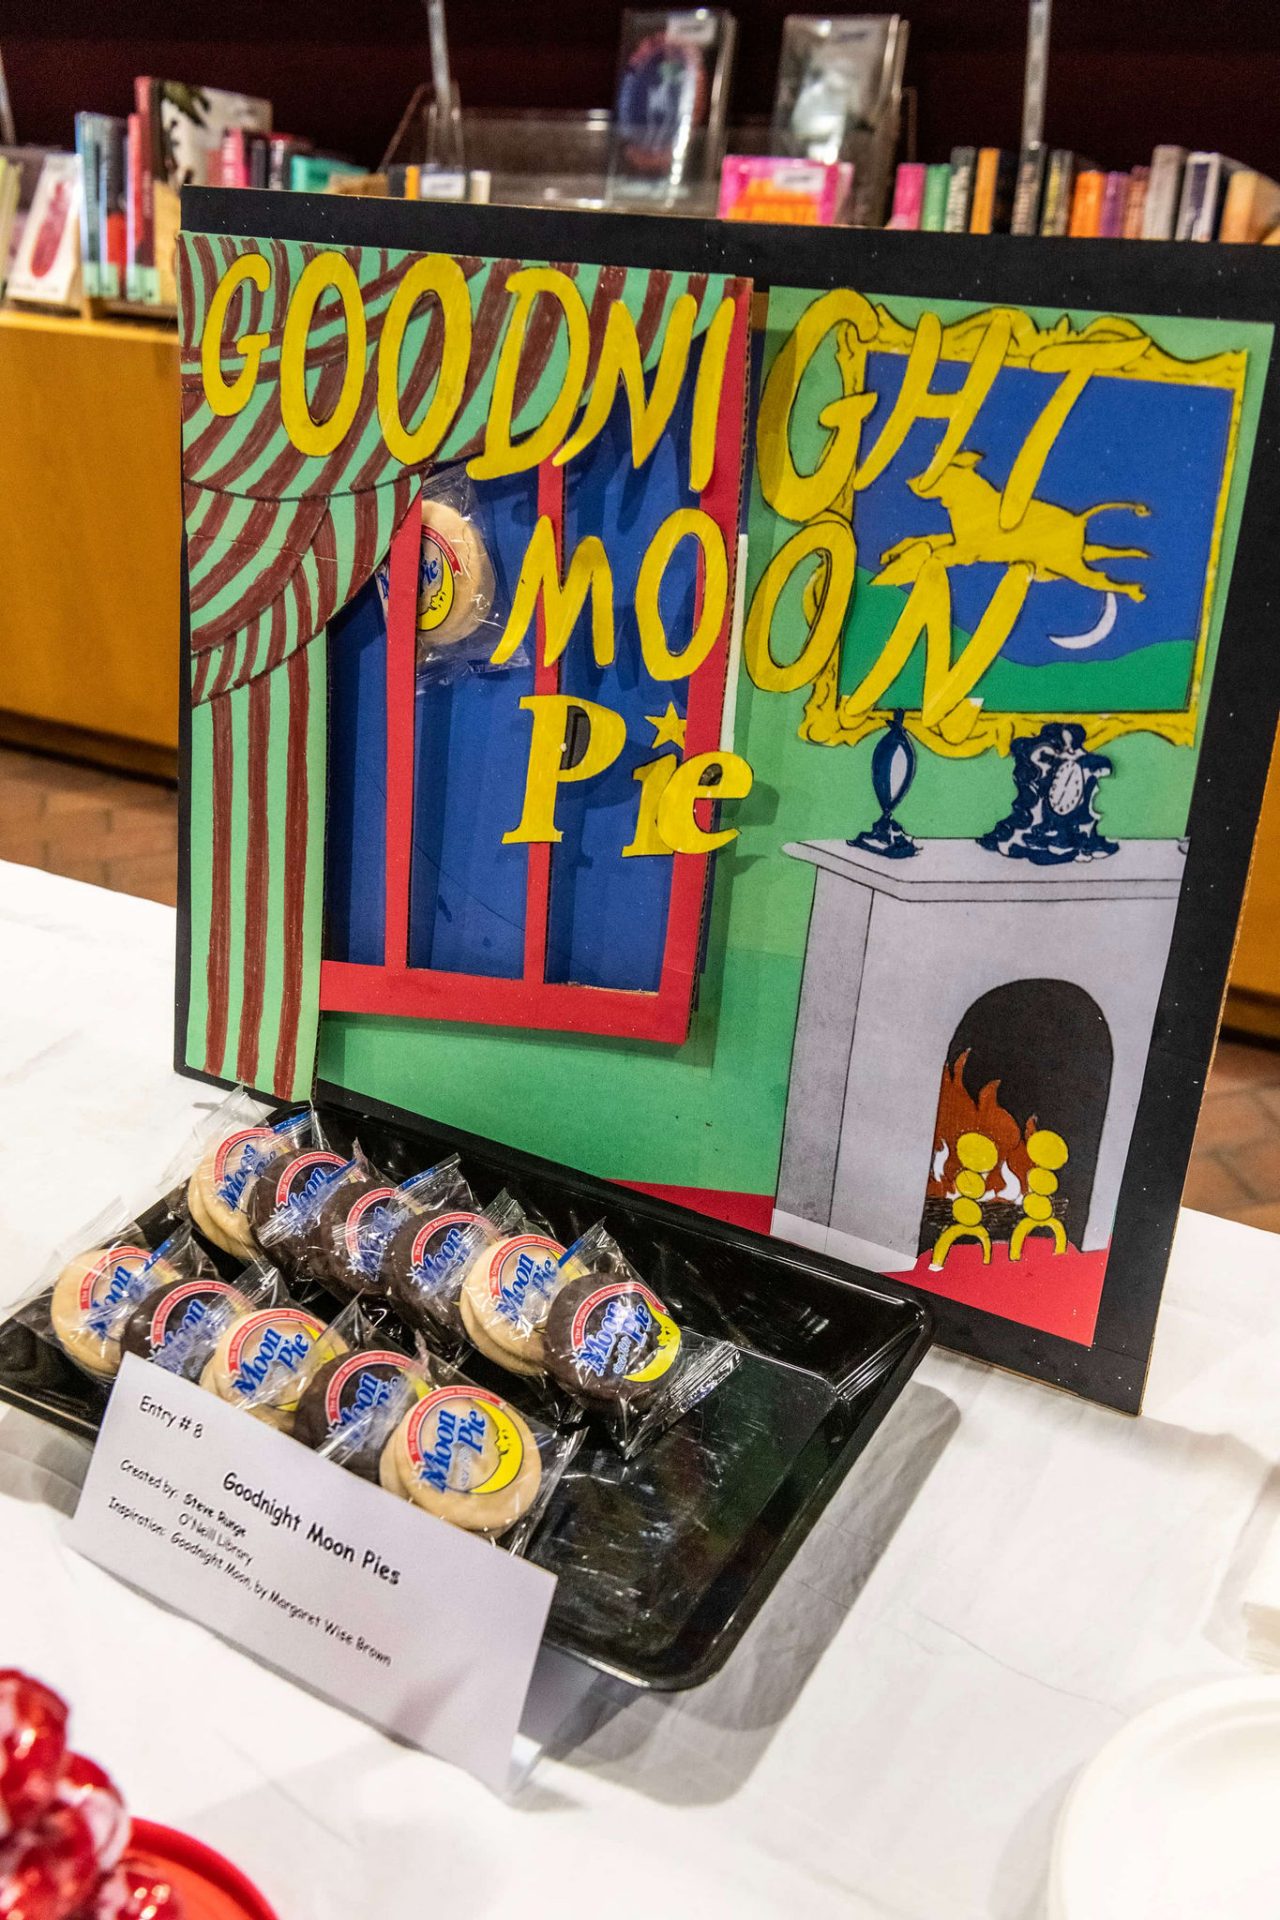 A takeoff on the cover of "Goodnight Moon," changed to "Goodnight Moon Pies" with moon pie cakes next to it